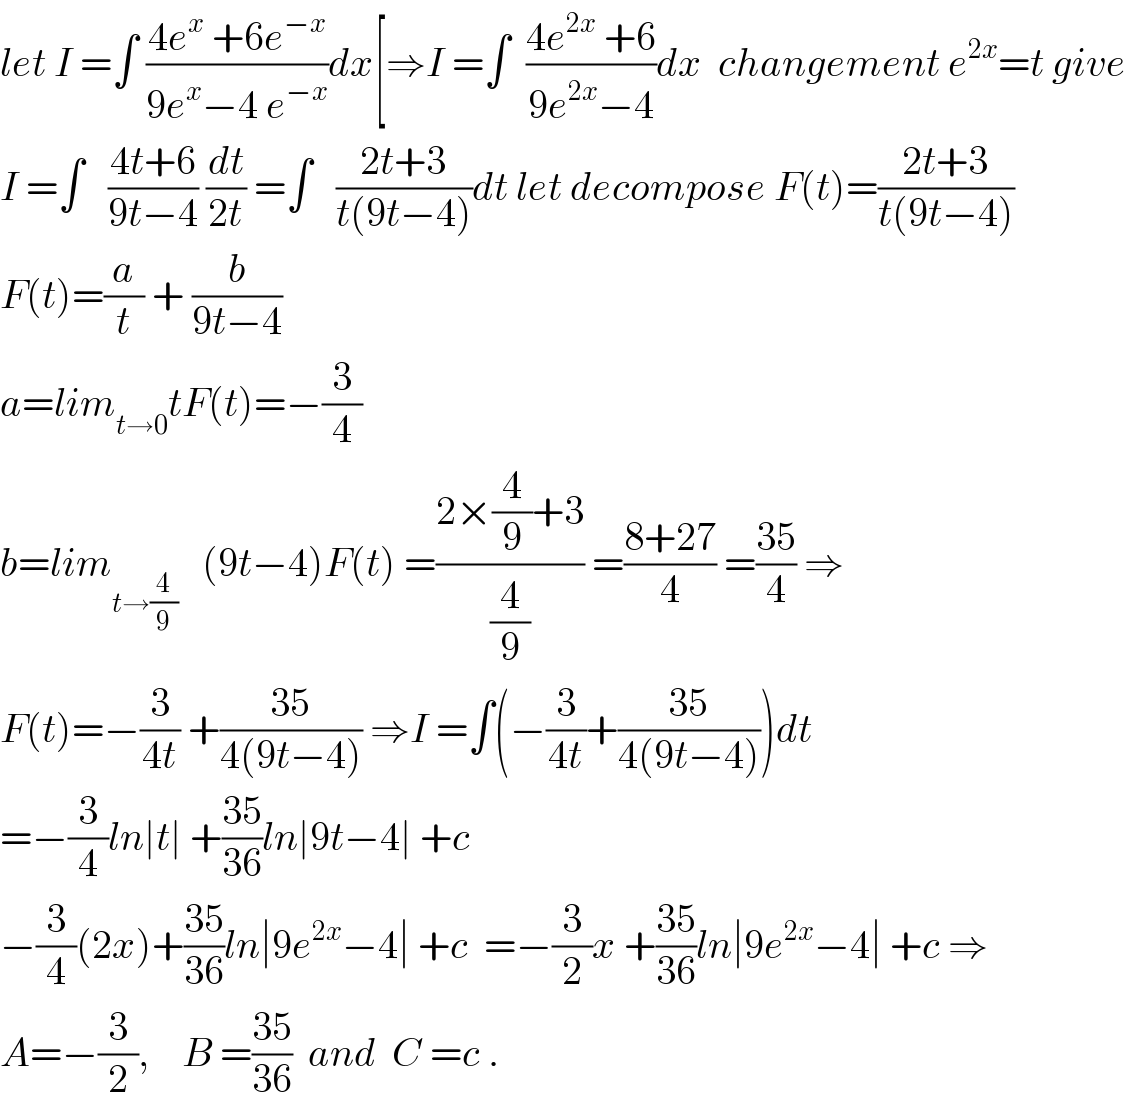 let I =∫ ((4e^x  +6e^(−x) )/(9e^x −4 e^(−x) ))dx[⇒I =∫  ((4e^(2x)  +6)/(9e^(2x) −4))dx  changement e^(2x) =t give  I =∫   ((4t+6)/(9t−4)) (dt/(2t)) =∫   ((2t+3)/(t(9t−4)))dt let decompose F(t)=((2t+3)/(t(9t−4)))  F(t)=(a/t) + (b/(9t−4))  a=lim_(t→0) tF(t)=−(3/4)  b=lim_(t→(4/9))    (9t−4)F(t) =((2×(4/9)+3)/(4/9)) =((8+27)/4) =((35)/4) ⇒  F(t)=−(3/(4t)) +((35)/(4(9t−4))) ⇒I =∫(−(3/(4t))+((35)/(4(9t−4))))dt  =−(3/4)ln∣t∣ +((35)/(36))ln∣9t−4∣ +c  −(3/4)(2x)+((35)/(36))ln∣9e^(2x) −4∣ +c  =−(3/2)x +((35)/(36))ln∣9e^(2x) −4∣ +c ⇒  A=−(3/2),    B =((35)/(36))  and  C =c .  